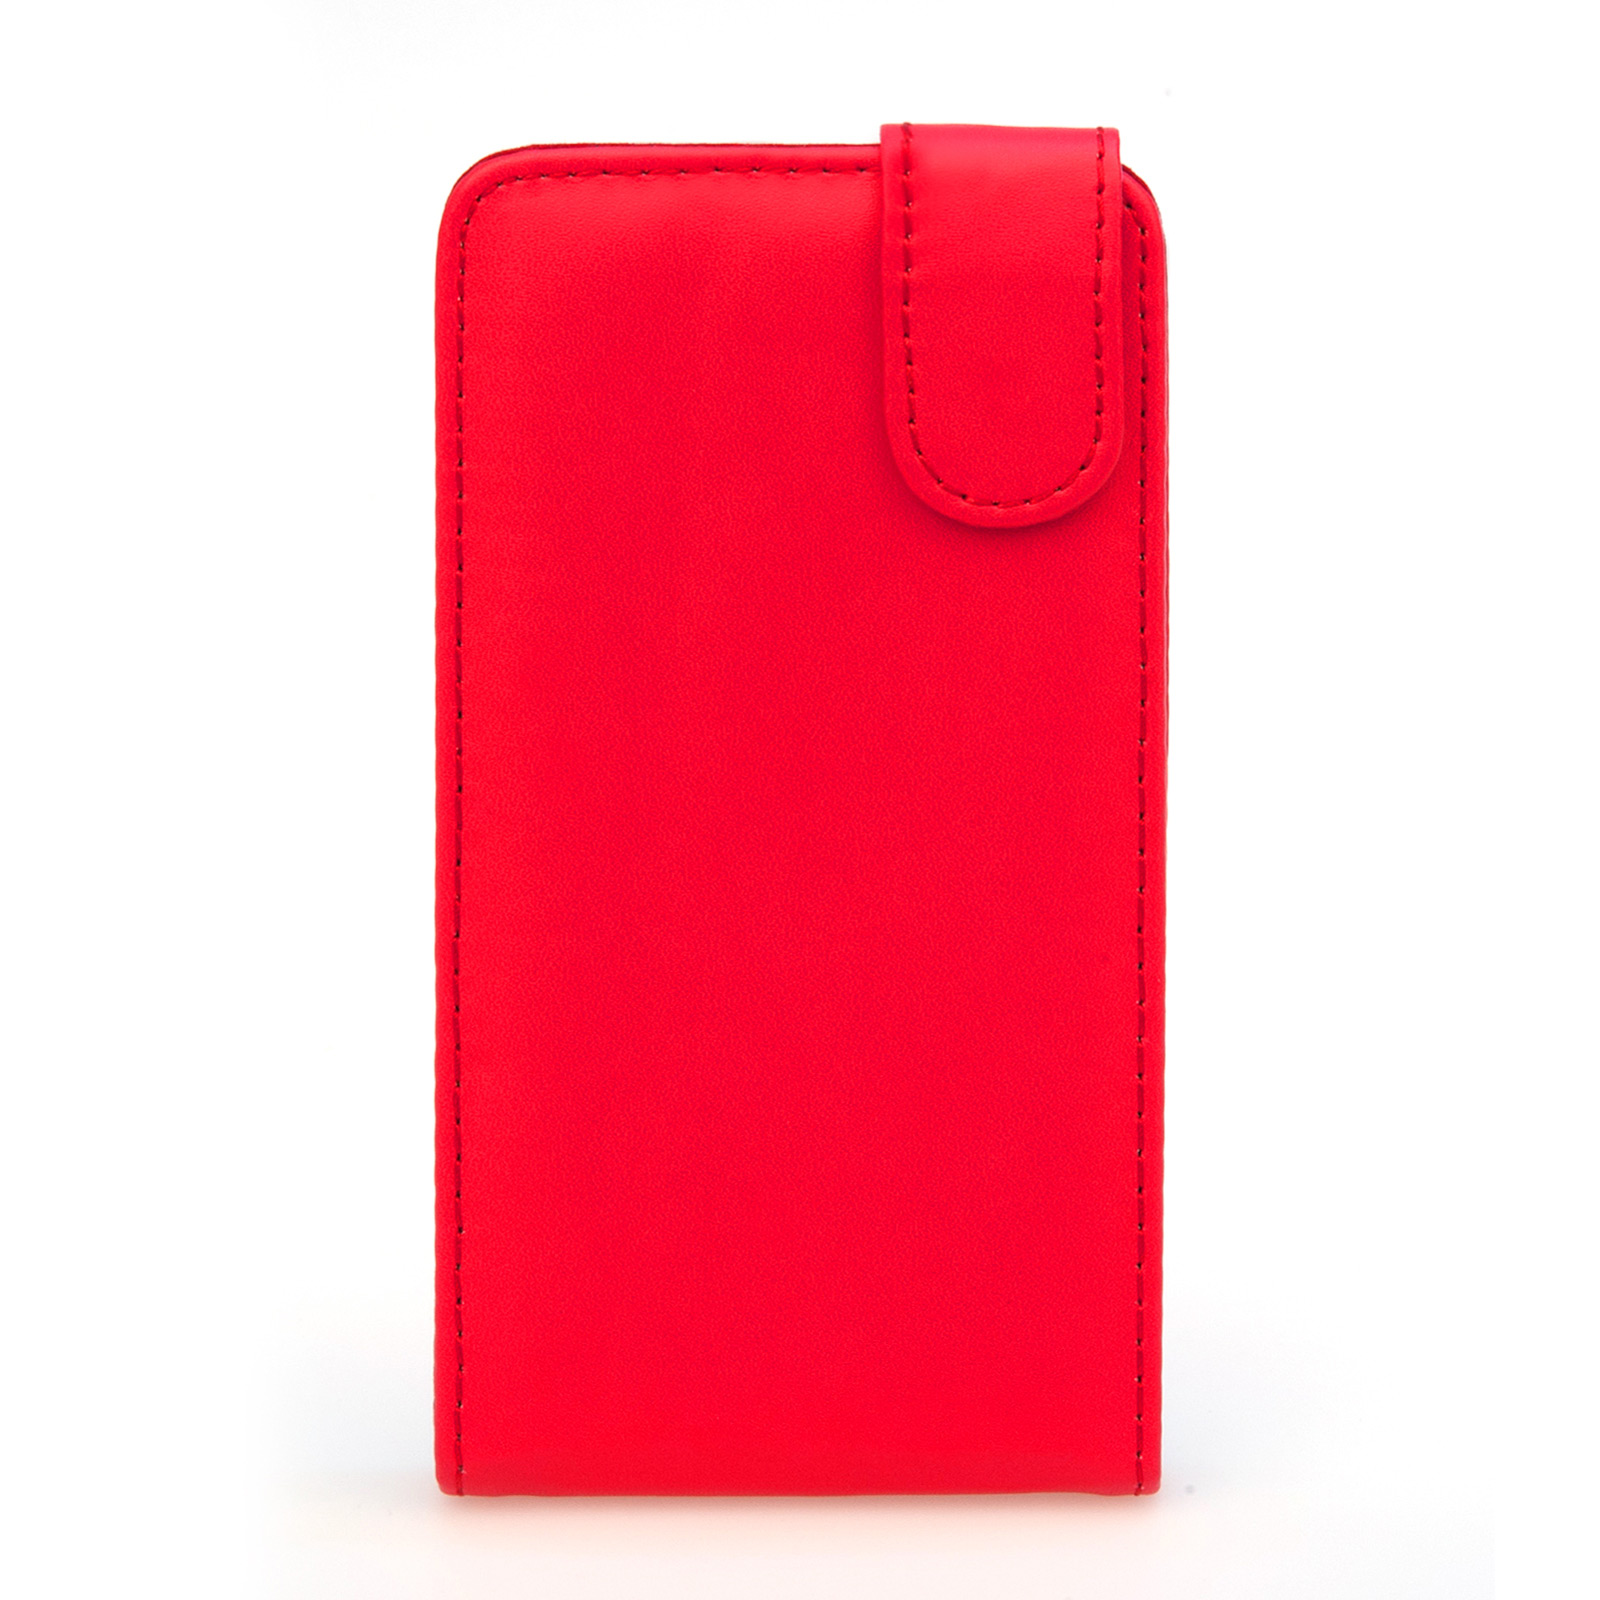 YouSave Accessories Huawei Ascend P7 Leather-Effect Flip Case - Red